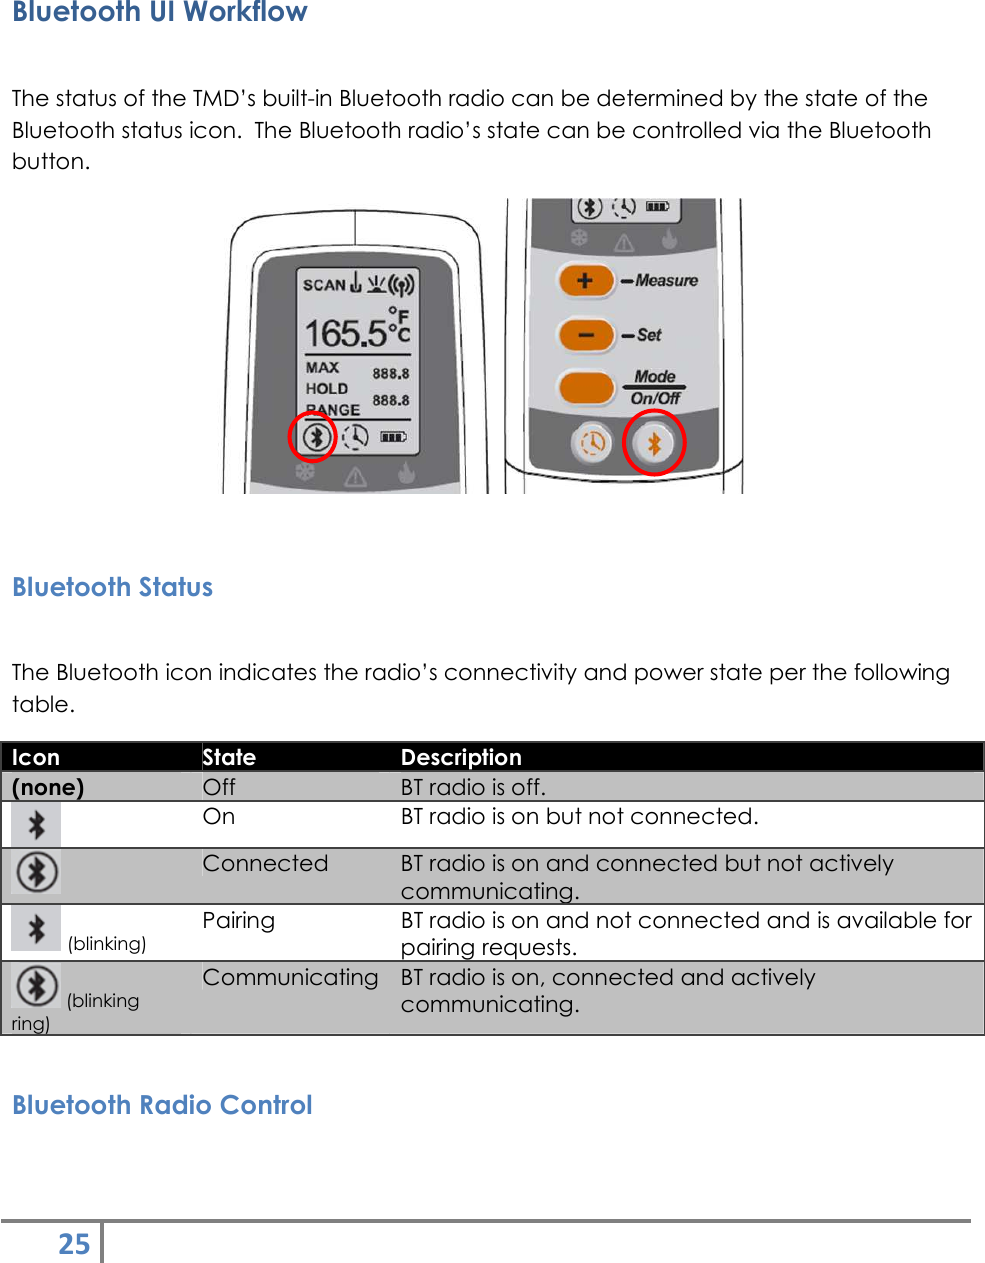 25    Bluetooth UI Workflow  The status of the TMD’s built-in Bluetooth radio can be determined by the state of the Bluetooth status icon.  The Bluetooth radio’s state can be controlled via the Bluetooth button.     Bluetooth Status  The Bluetooth icon indicates the radio’s connectivity and power state per the following table.  Icon  State  Description (none)  Off  BT radio is off.  On  BT radio is on but not connected.  Connected  BT radio is on and connected but not actively communicating.  (blinking) Pairing  BT radio is on and not connected and is available for pairing requests.  (blinking ring) Communicating BT radio is on, connected and actively communicating.  Bluetooth Radio Control  